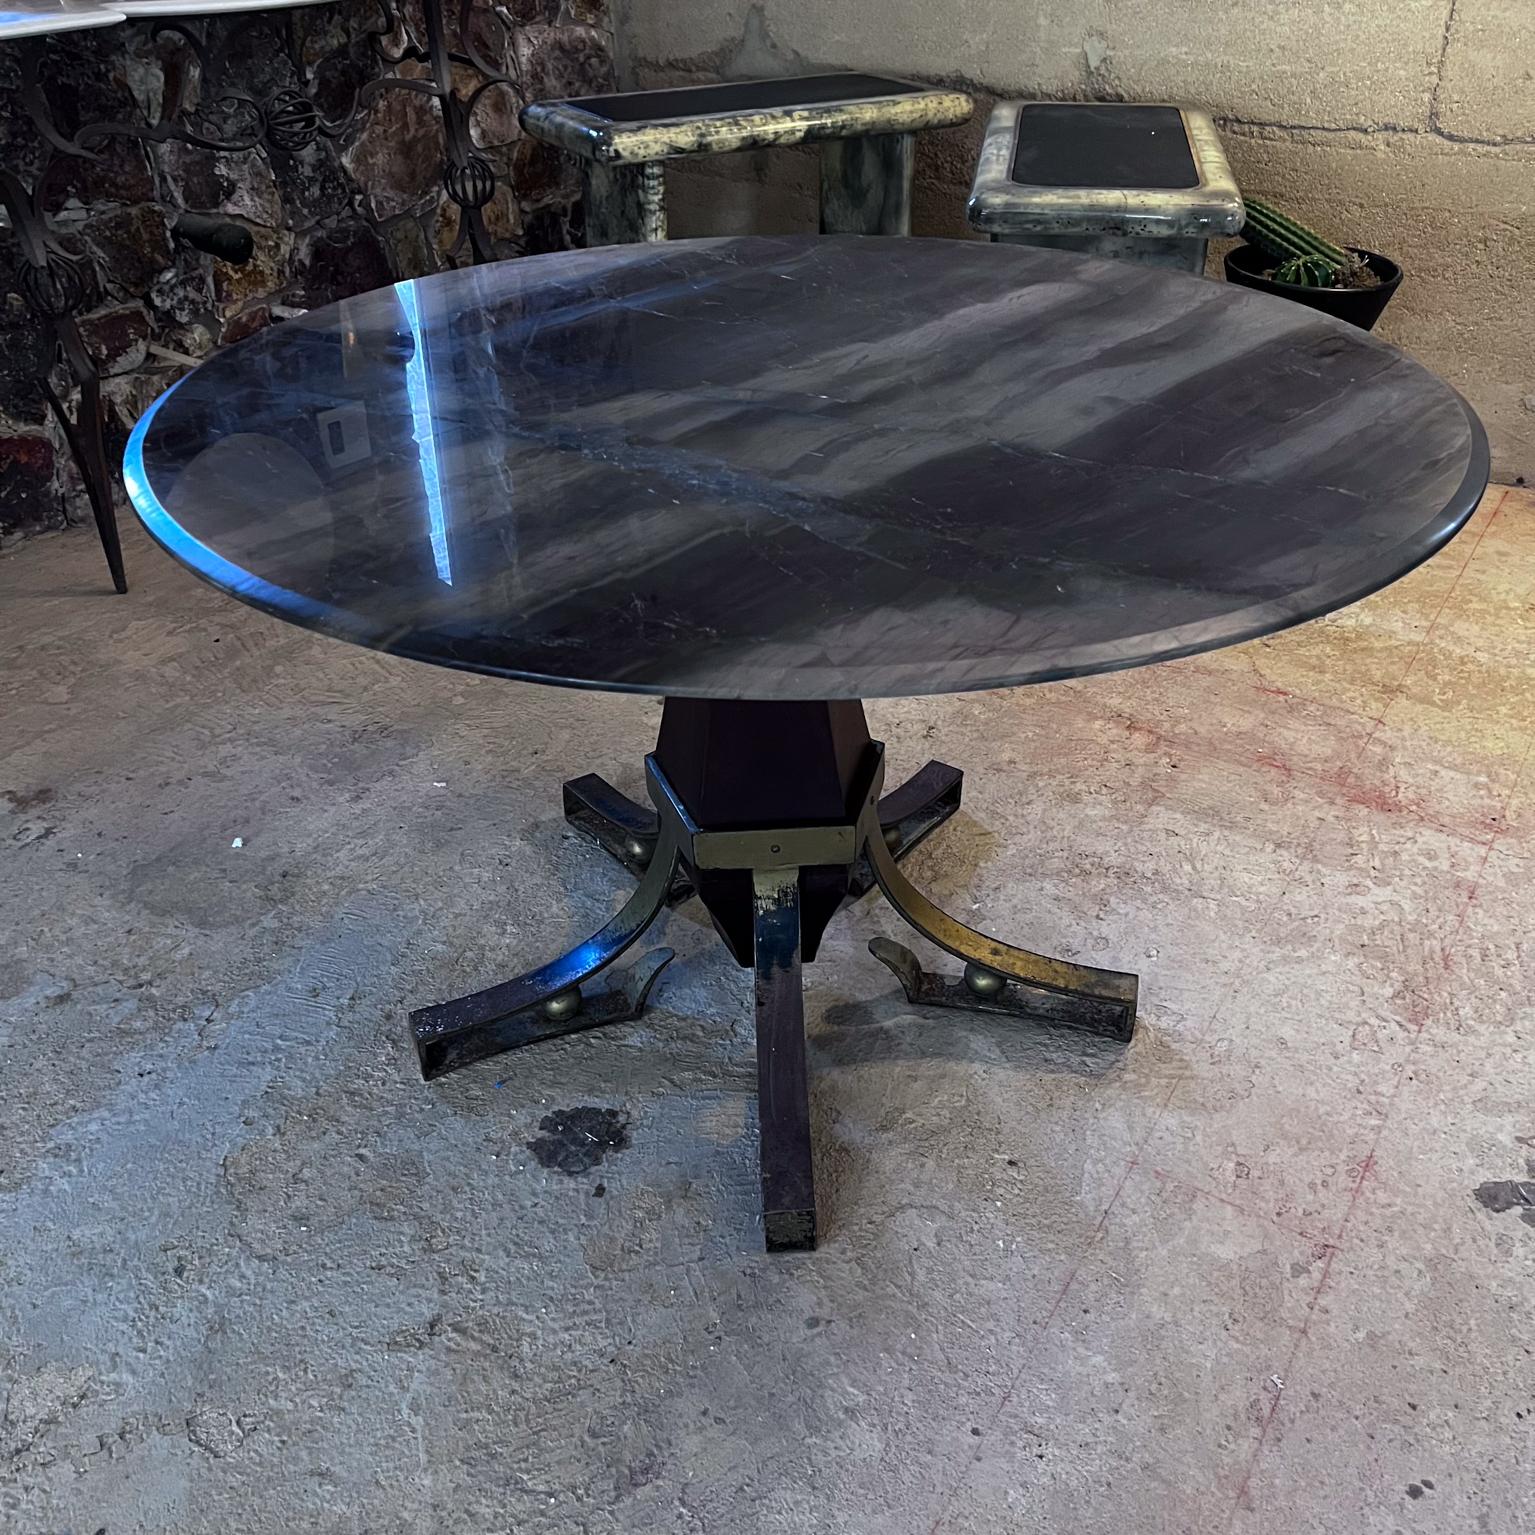 1950s Arturo Pani Forged Iron Mahogany Marble Dining Table Mexico City In Good Condition For Sale In Chula Vista, CA